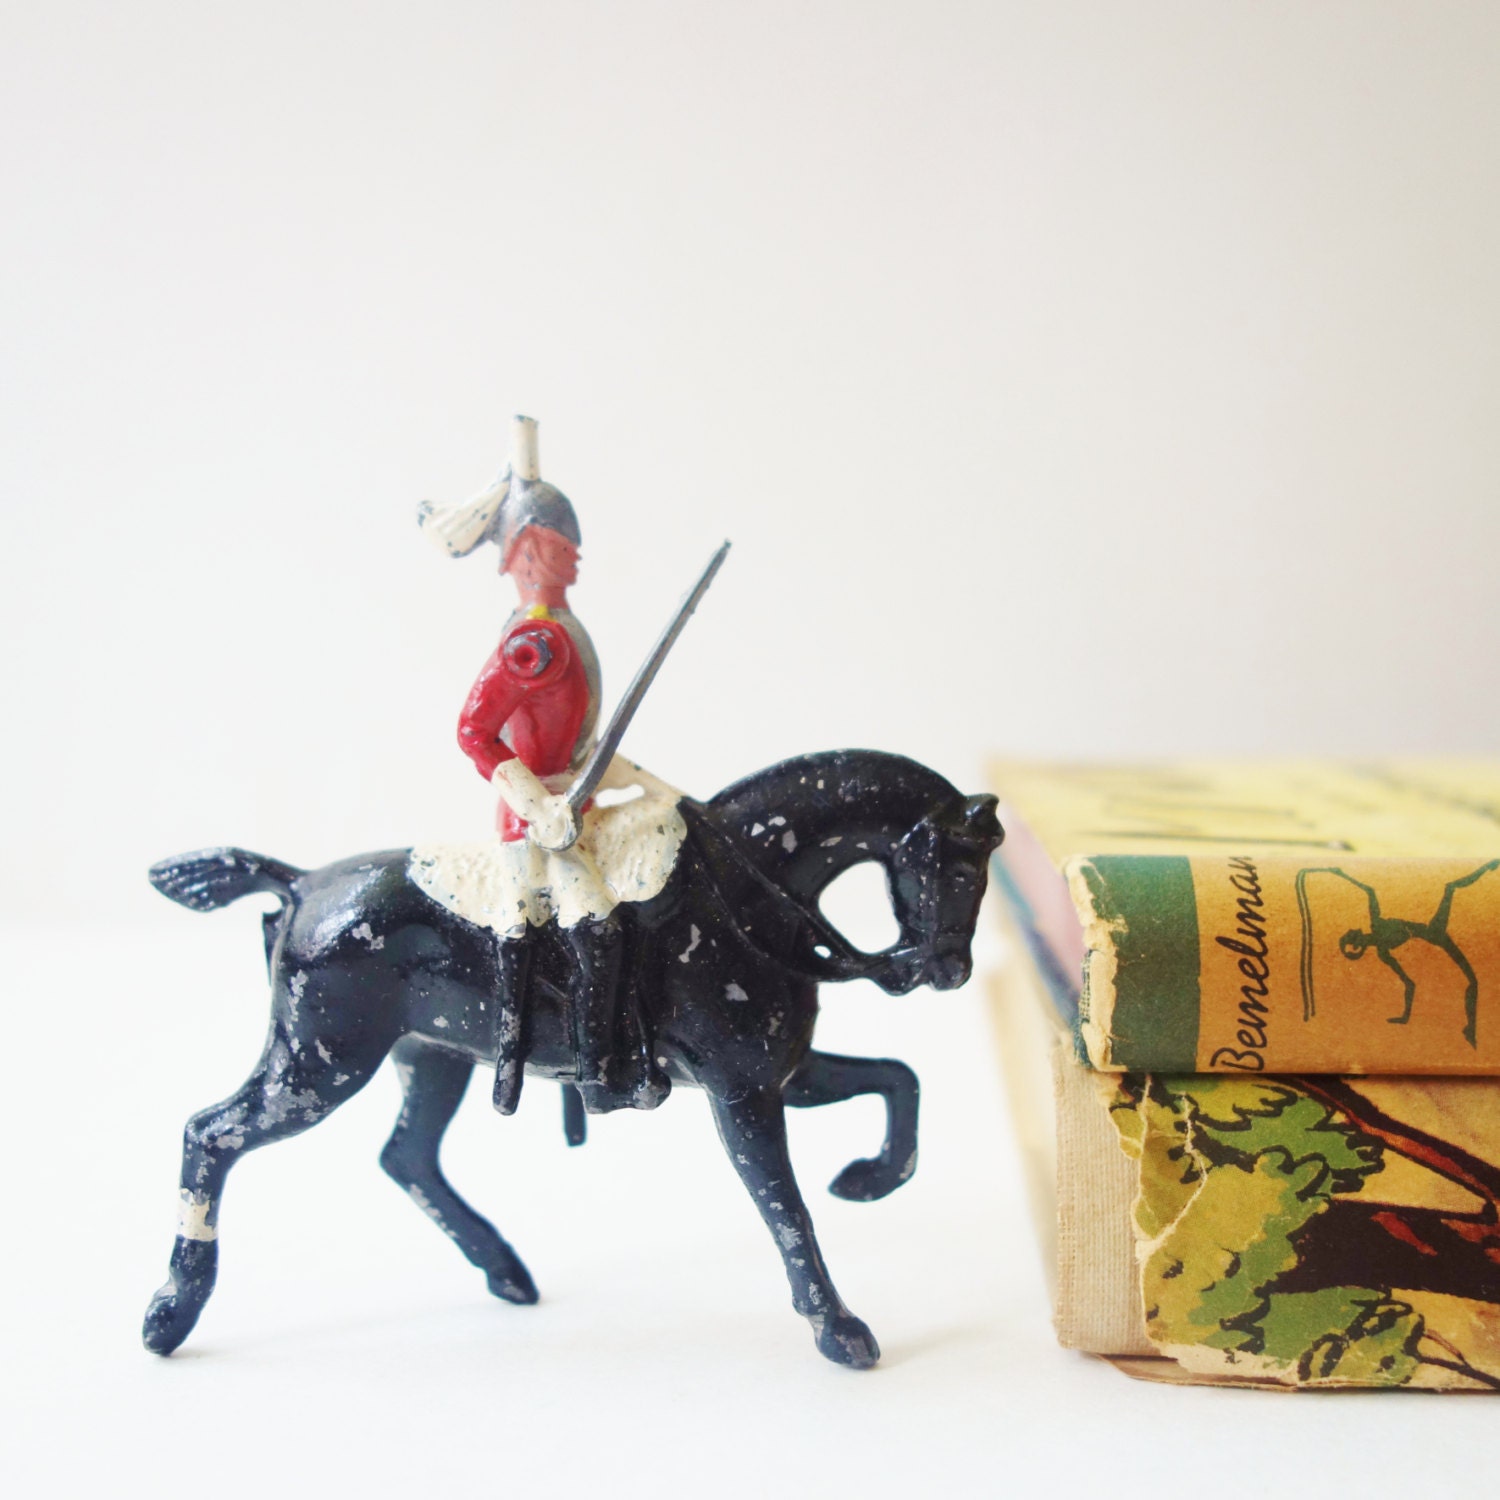 Antique Lead Soldier, Old Brittain Toy, Horse and rider, Soldier toy, Diorama, French Soldier, Black horse, metal toy, Vintage nursery decor - ZomaleeVintage